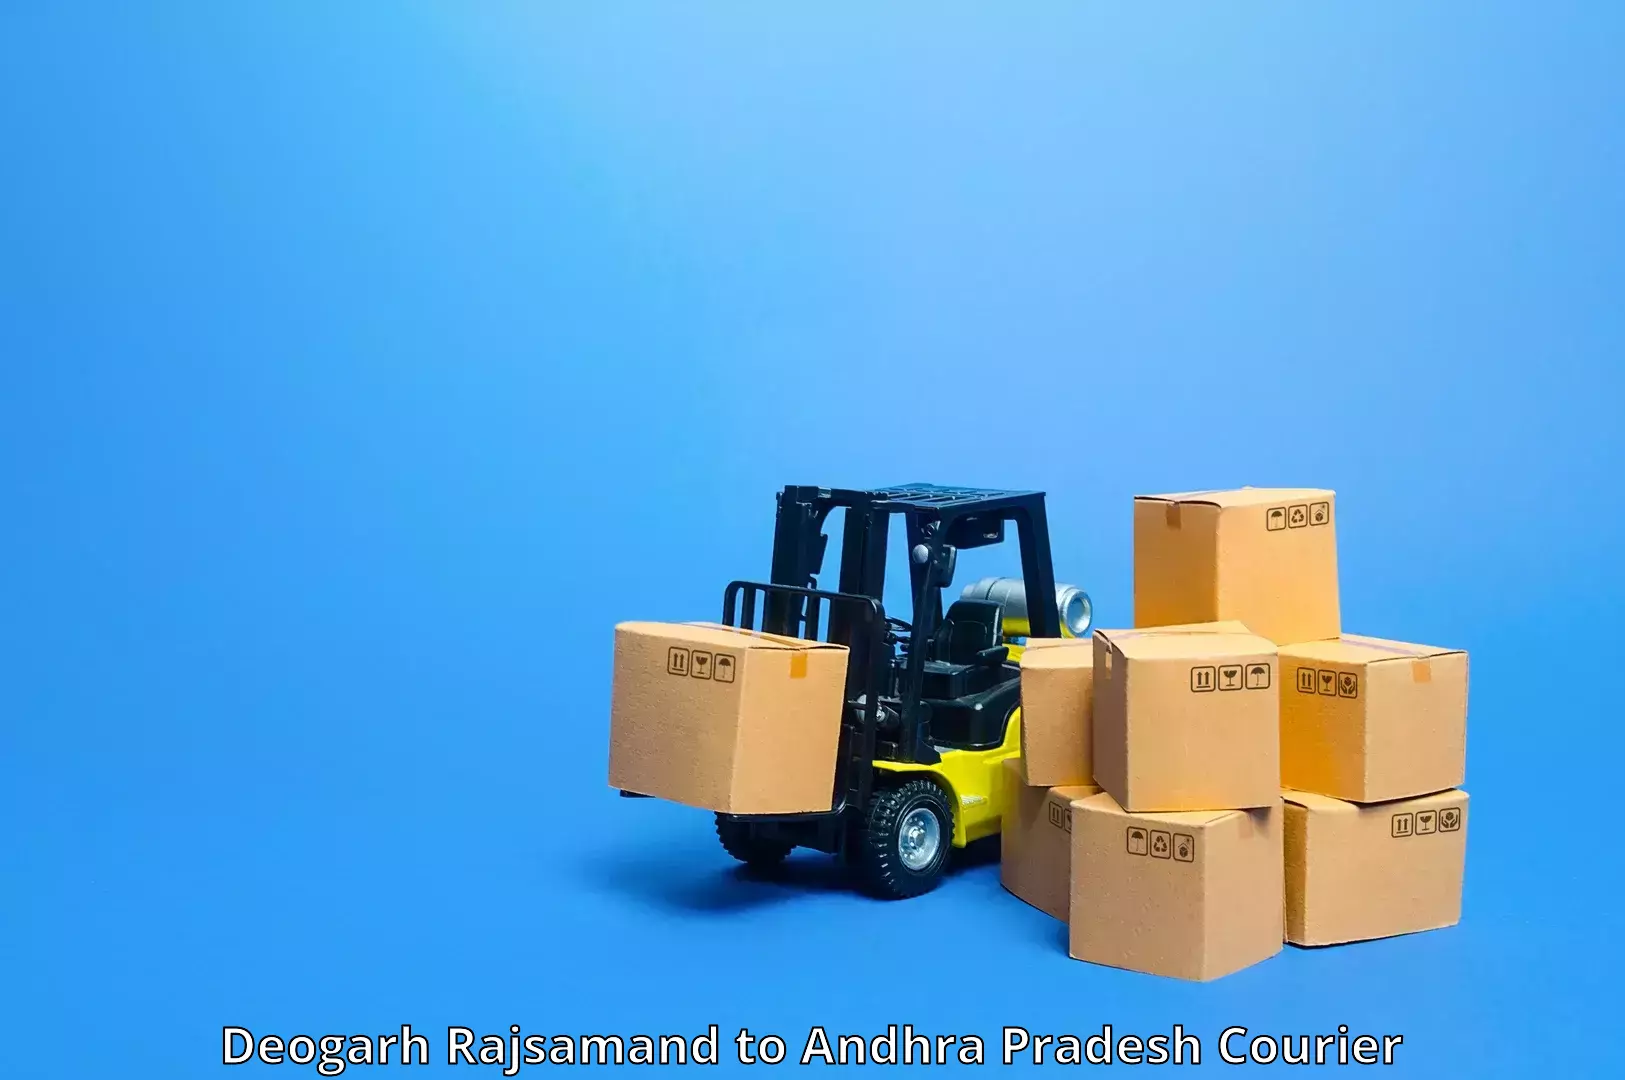 Round-the-clock parcel delivery Deogarh Rajsamand to Nakkapallin